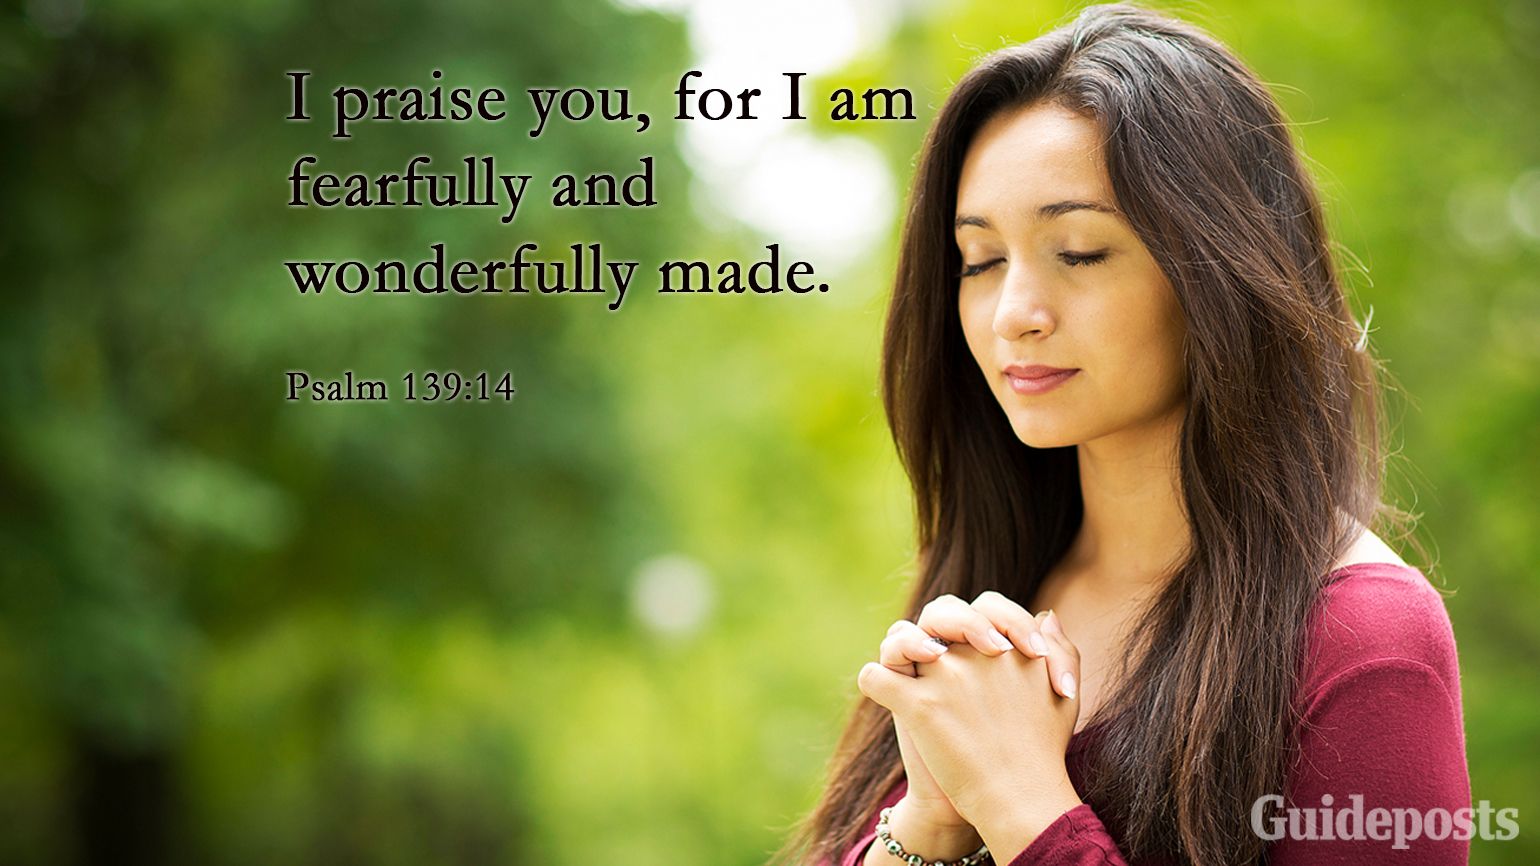 I praise you, for I am fearfully and wonderfully made.